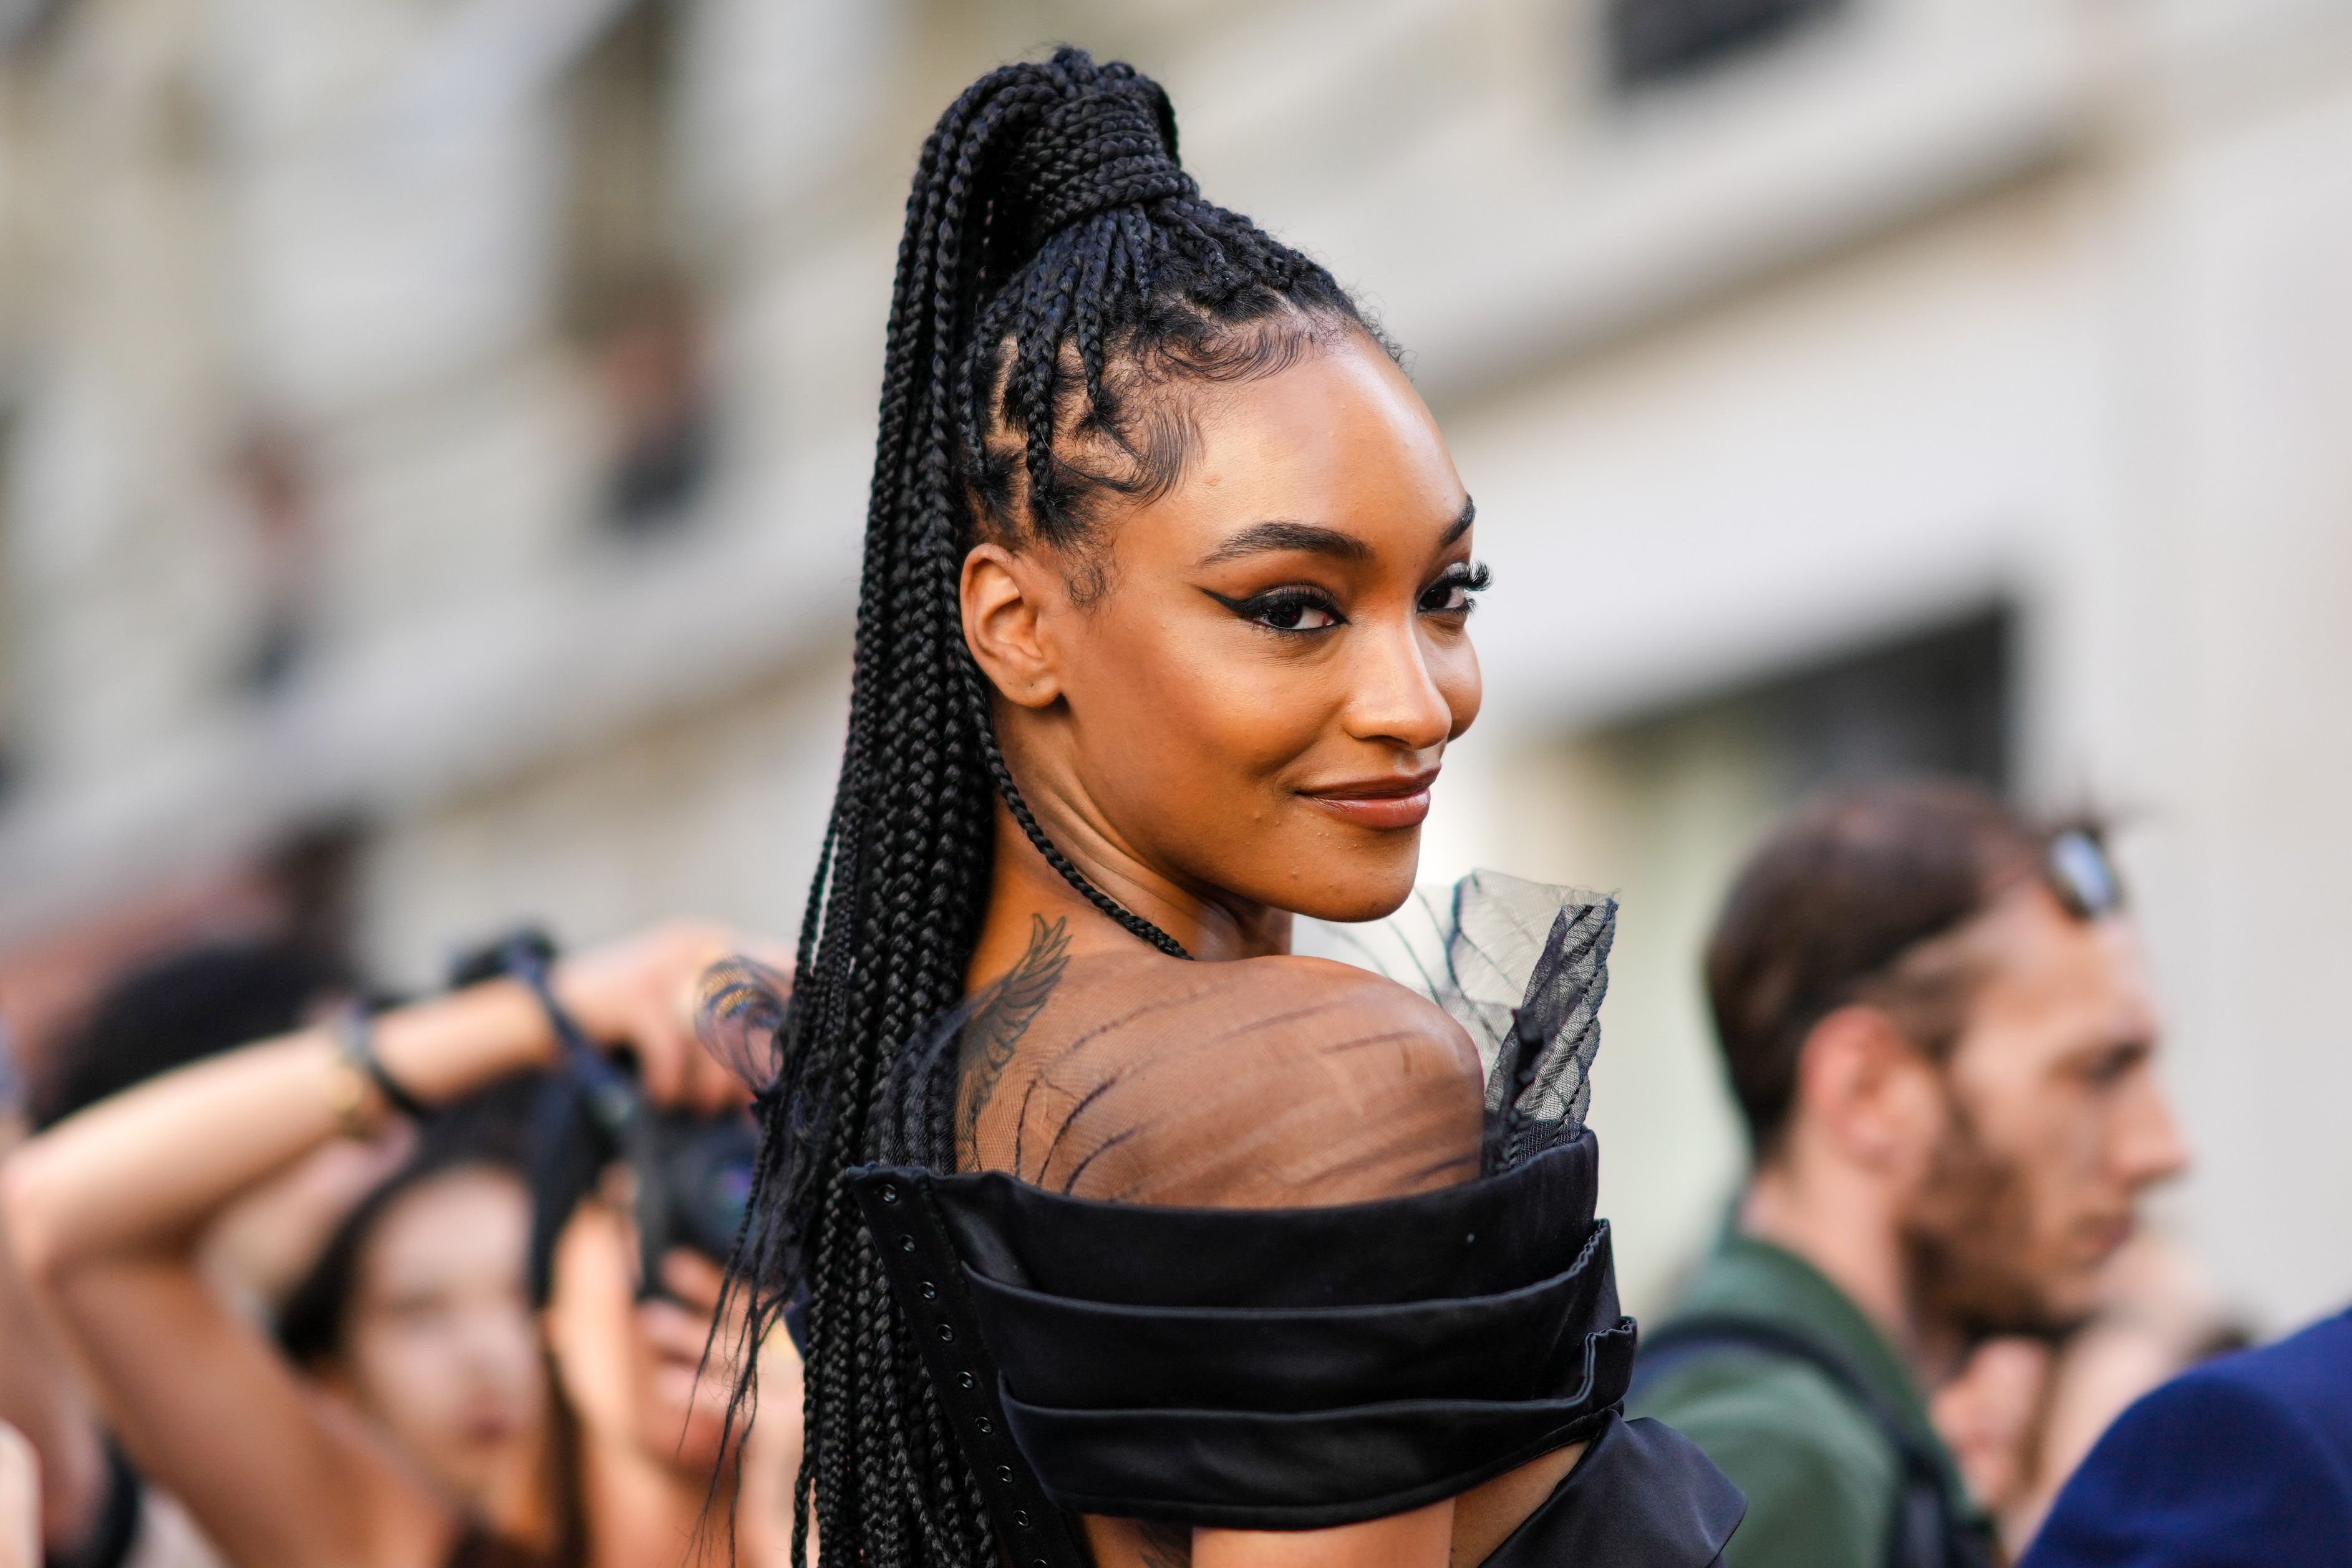 Can I get Box braids like this (maybe more braids) if I'm a male with  pretty thick hair that's wavy when dry and curly when wet? : r/Hair